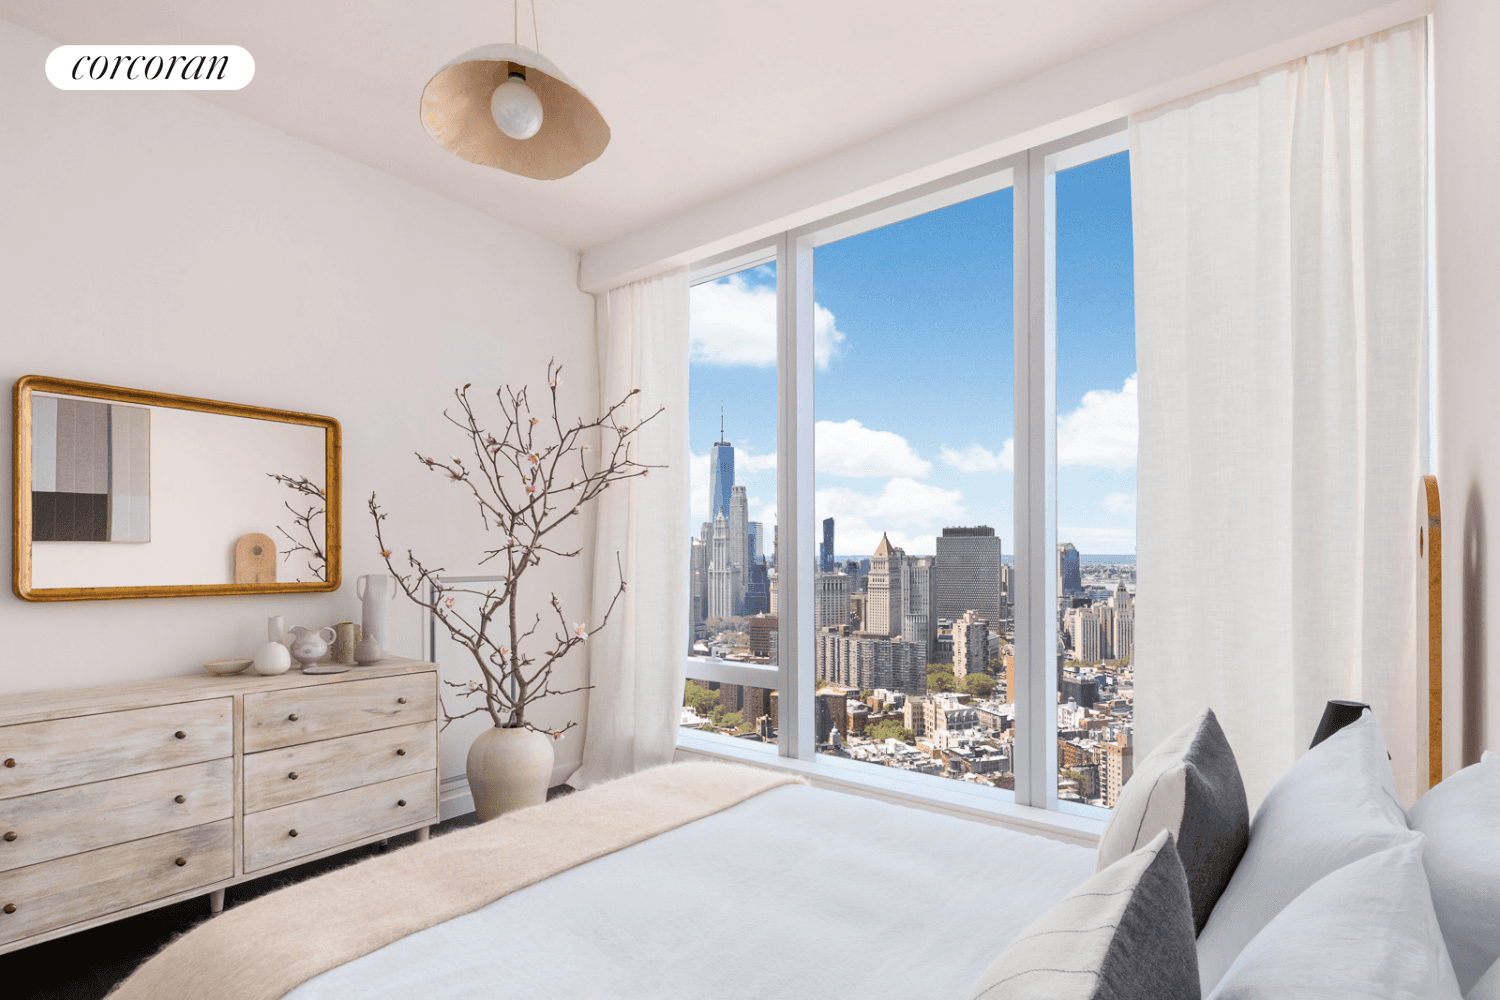 ONE MANHATTAN SQUARE OFFERS ONE OF THE LAST 20 YEAR TAX ABATEMENTS AVAILABLE IN NEW YORK CITYResidence 59A is a 1, 667 square foot three bedroom, three bathroom with an ...